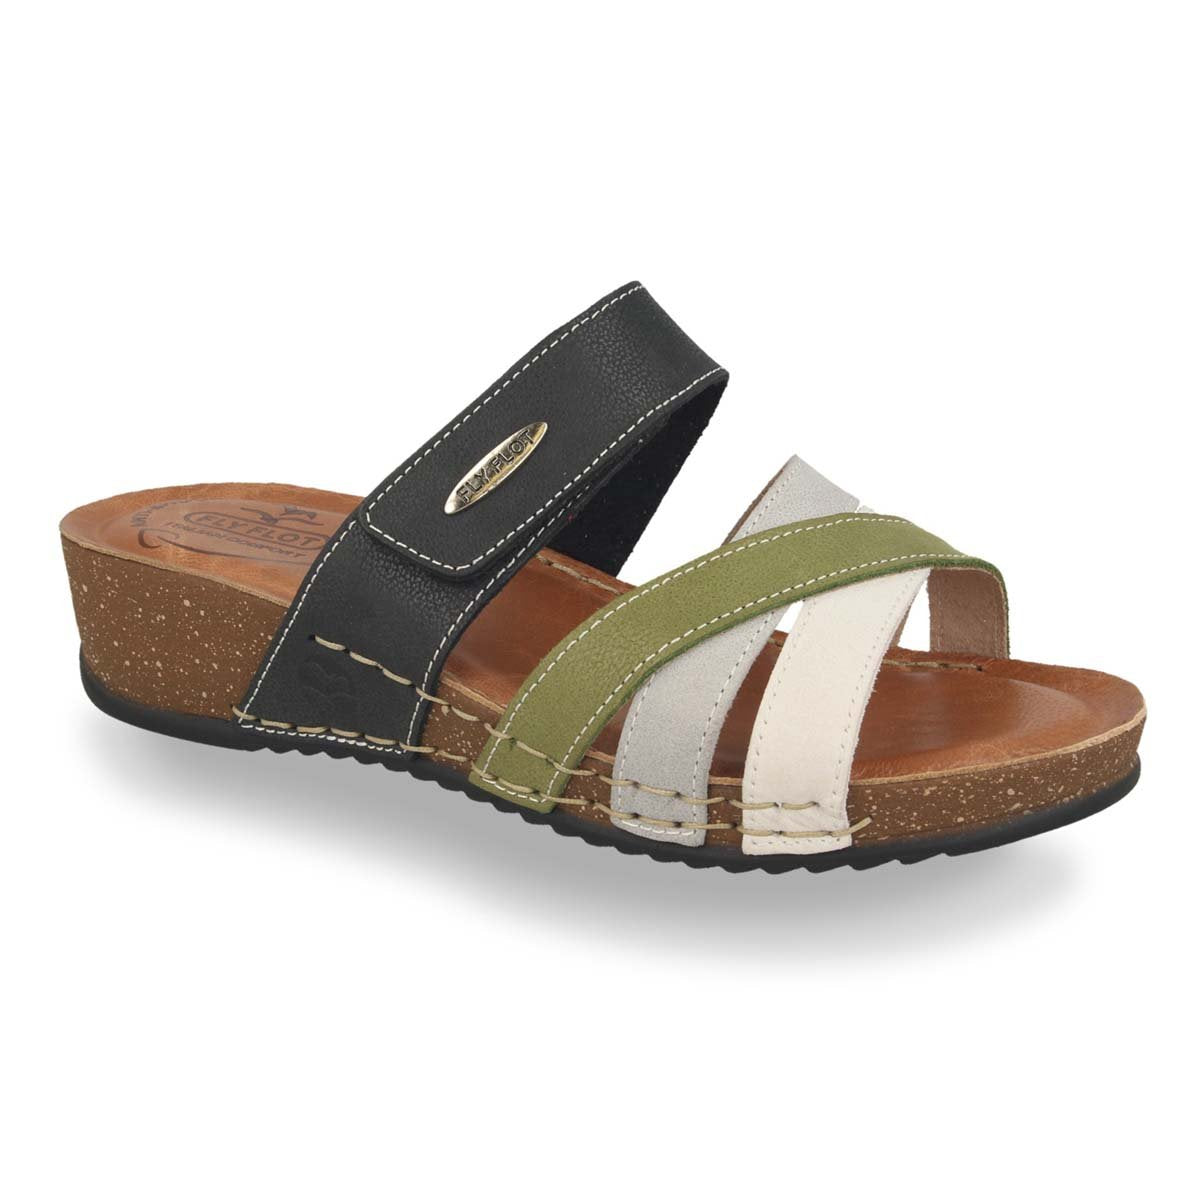 See the Velcro Multicolour Strappy Slide Women Sandals With Anti-Shock Cushioned Leather Insole in the colour BLACK, available in various sizes